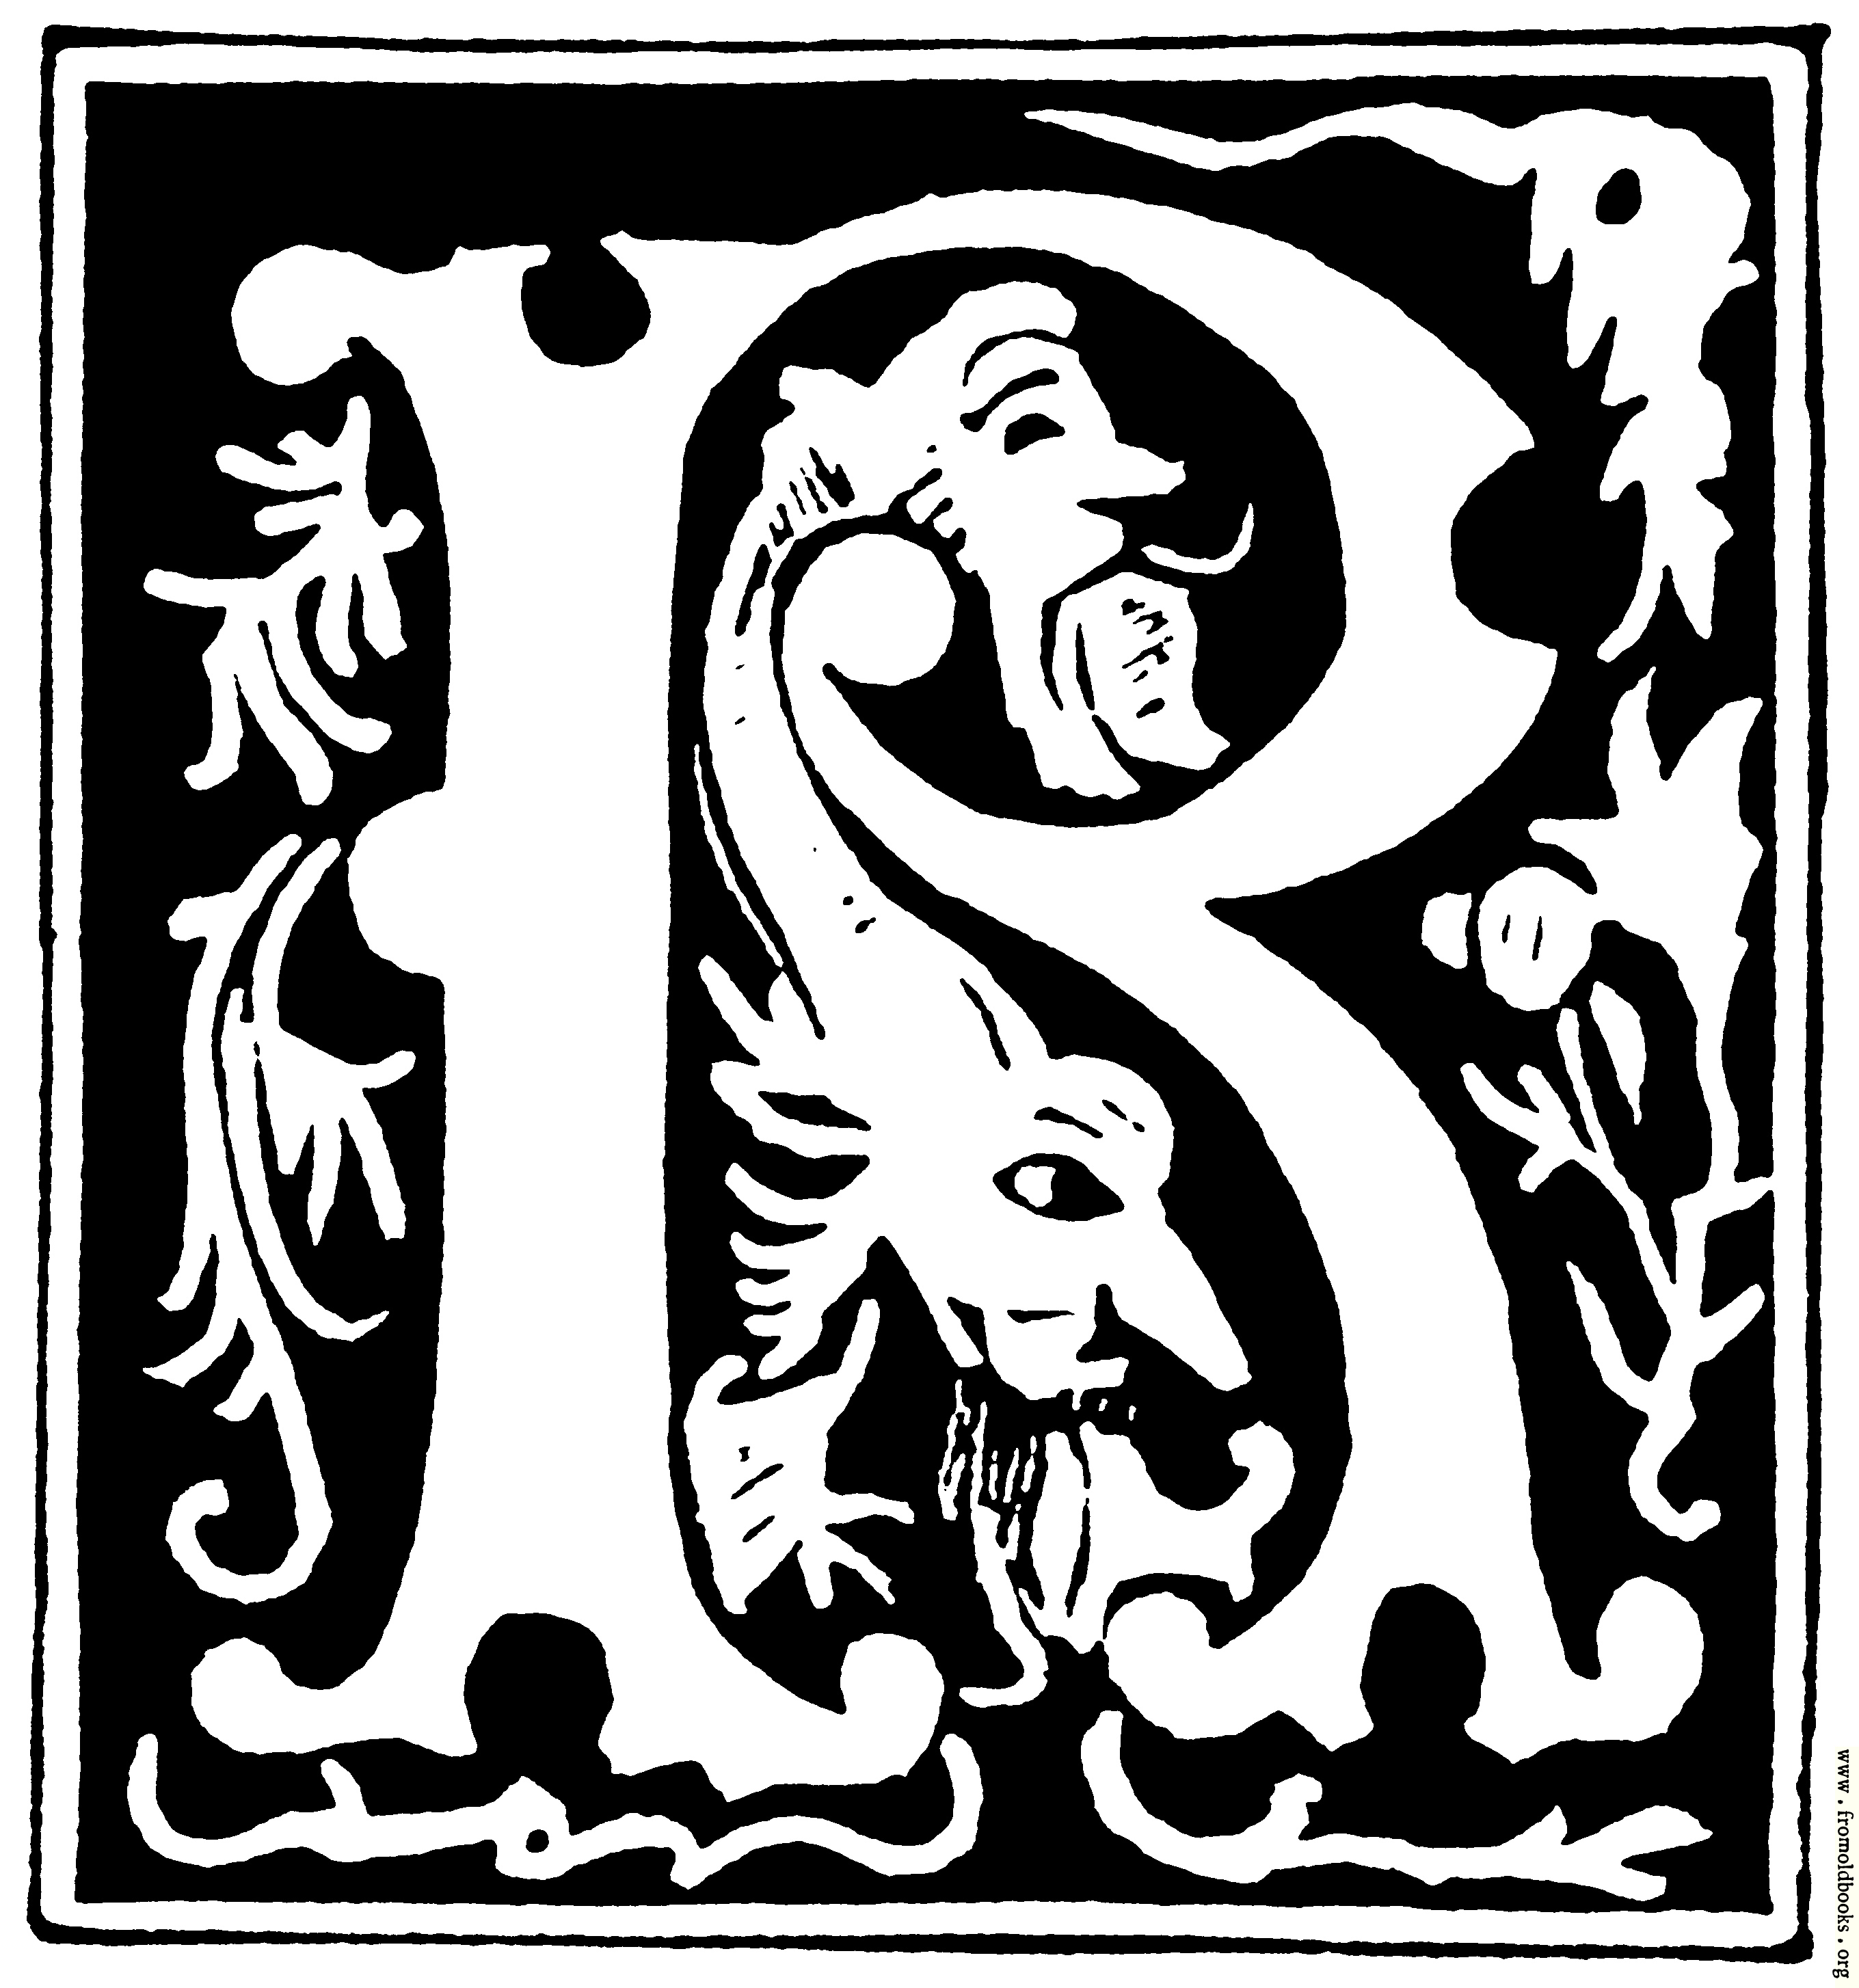 Decorative Initial Letter R From 16th Century